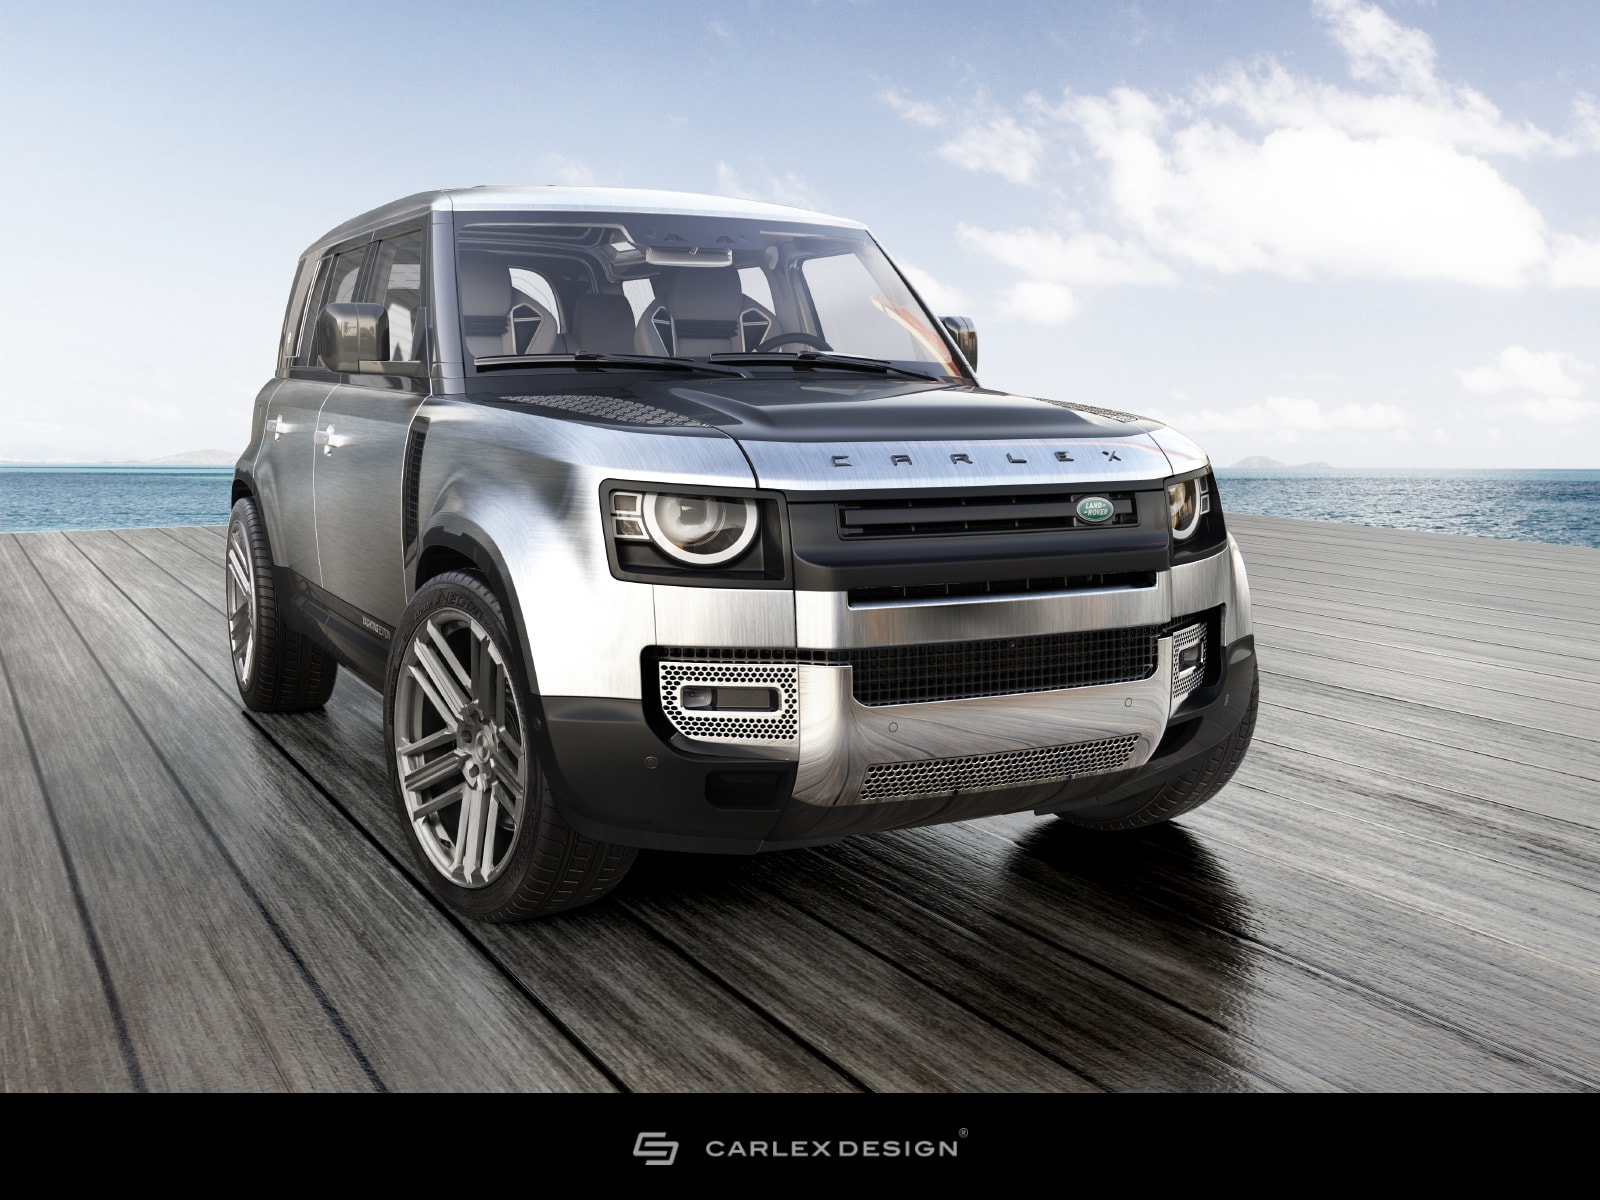 Carlex Design's Land Rover Defender Reminds Us of a Luxury Yacht -  autoevolution